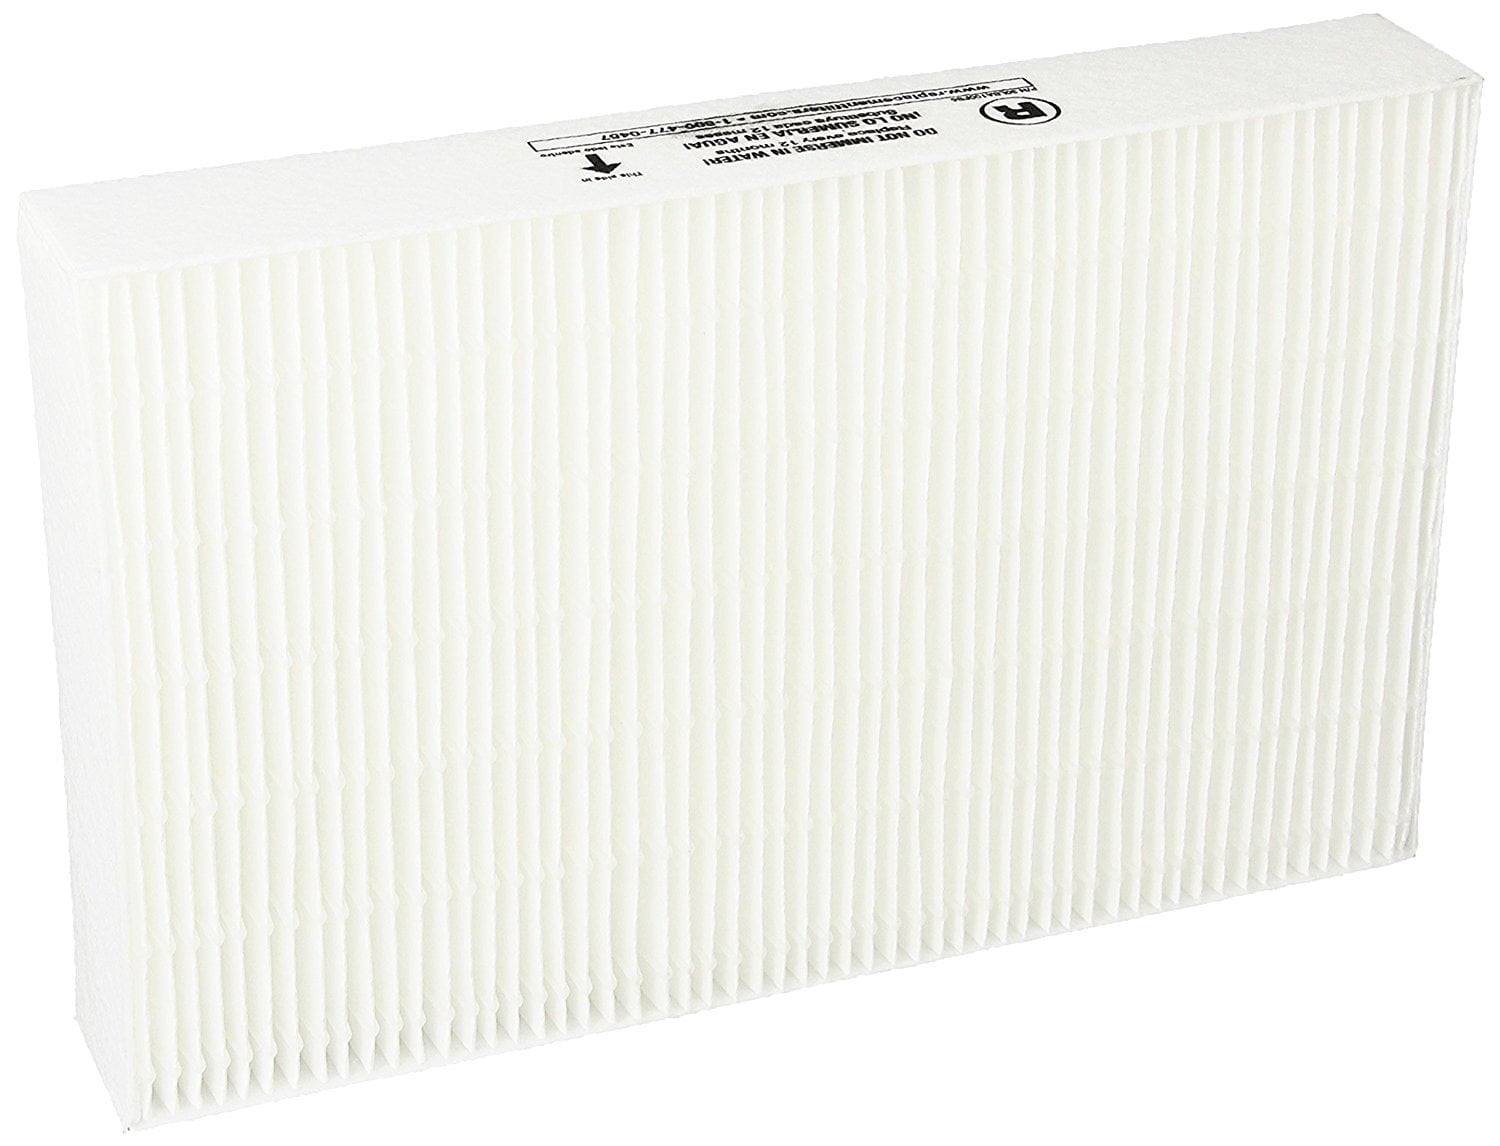 REP HRF-R2 Air Purifier Filter For Honeywell HPA-200 Air Purifiers 2 Filter